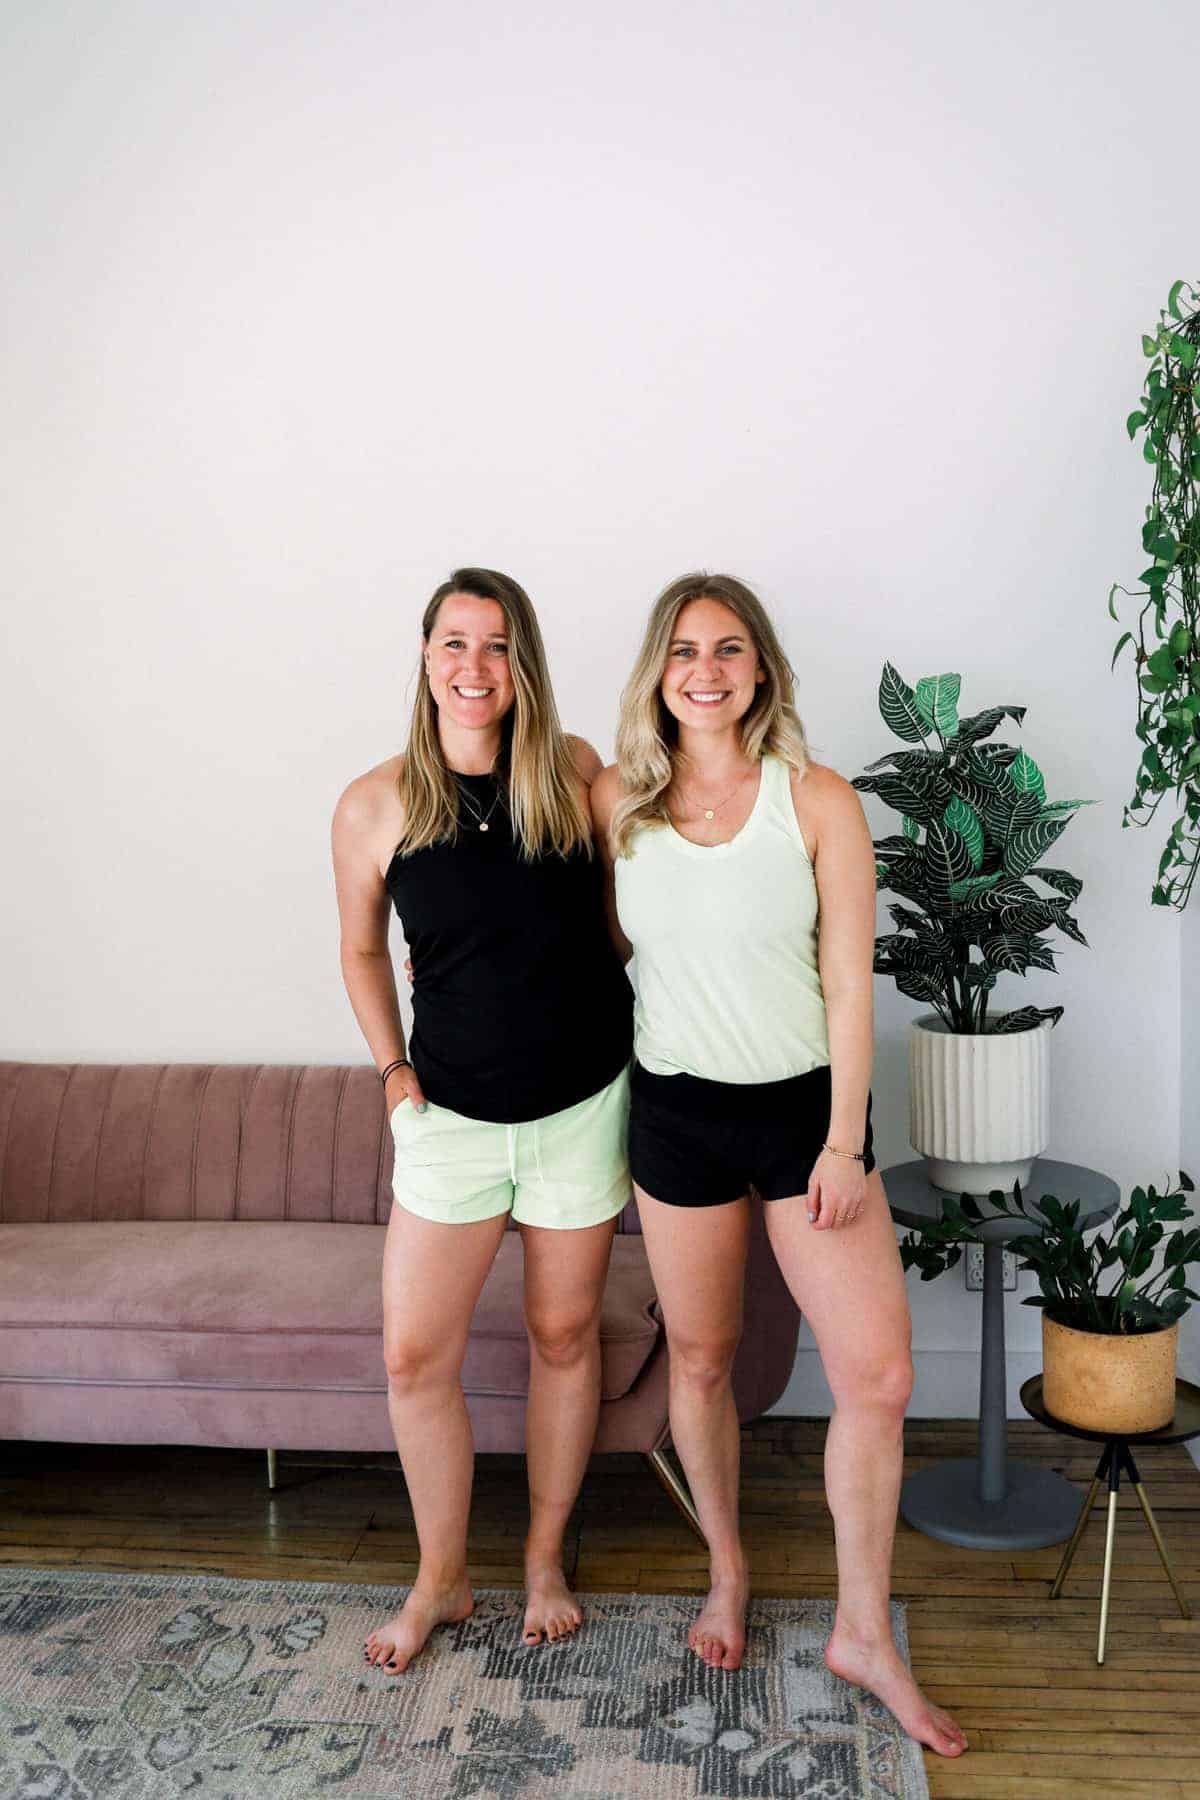 lee and emily wearing lululemon shorts and smiling at the camera